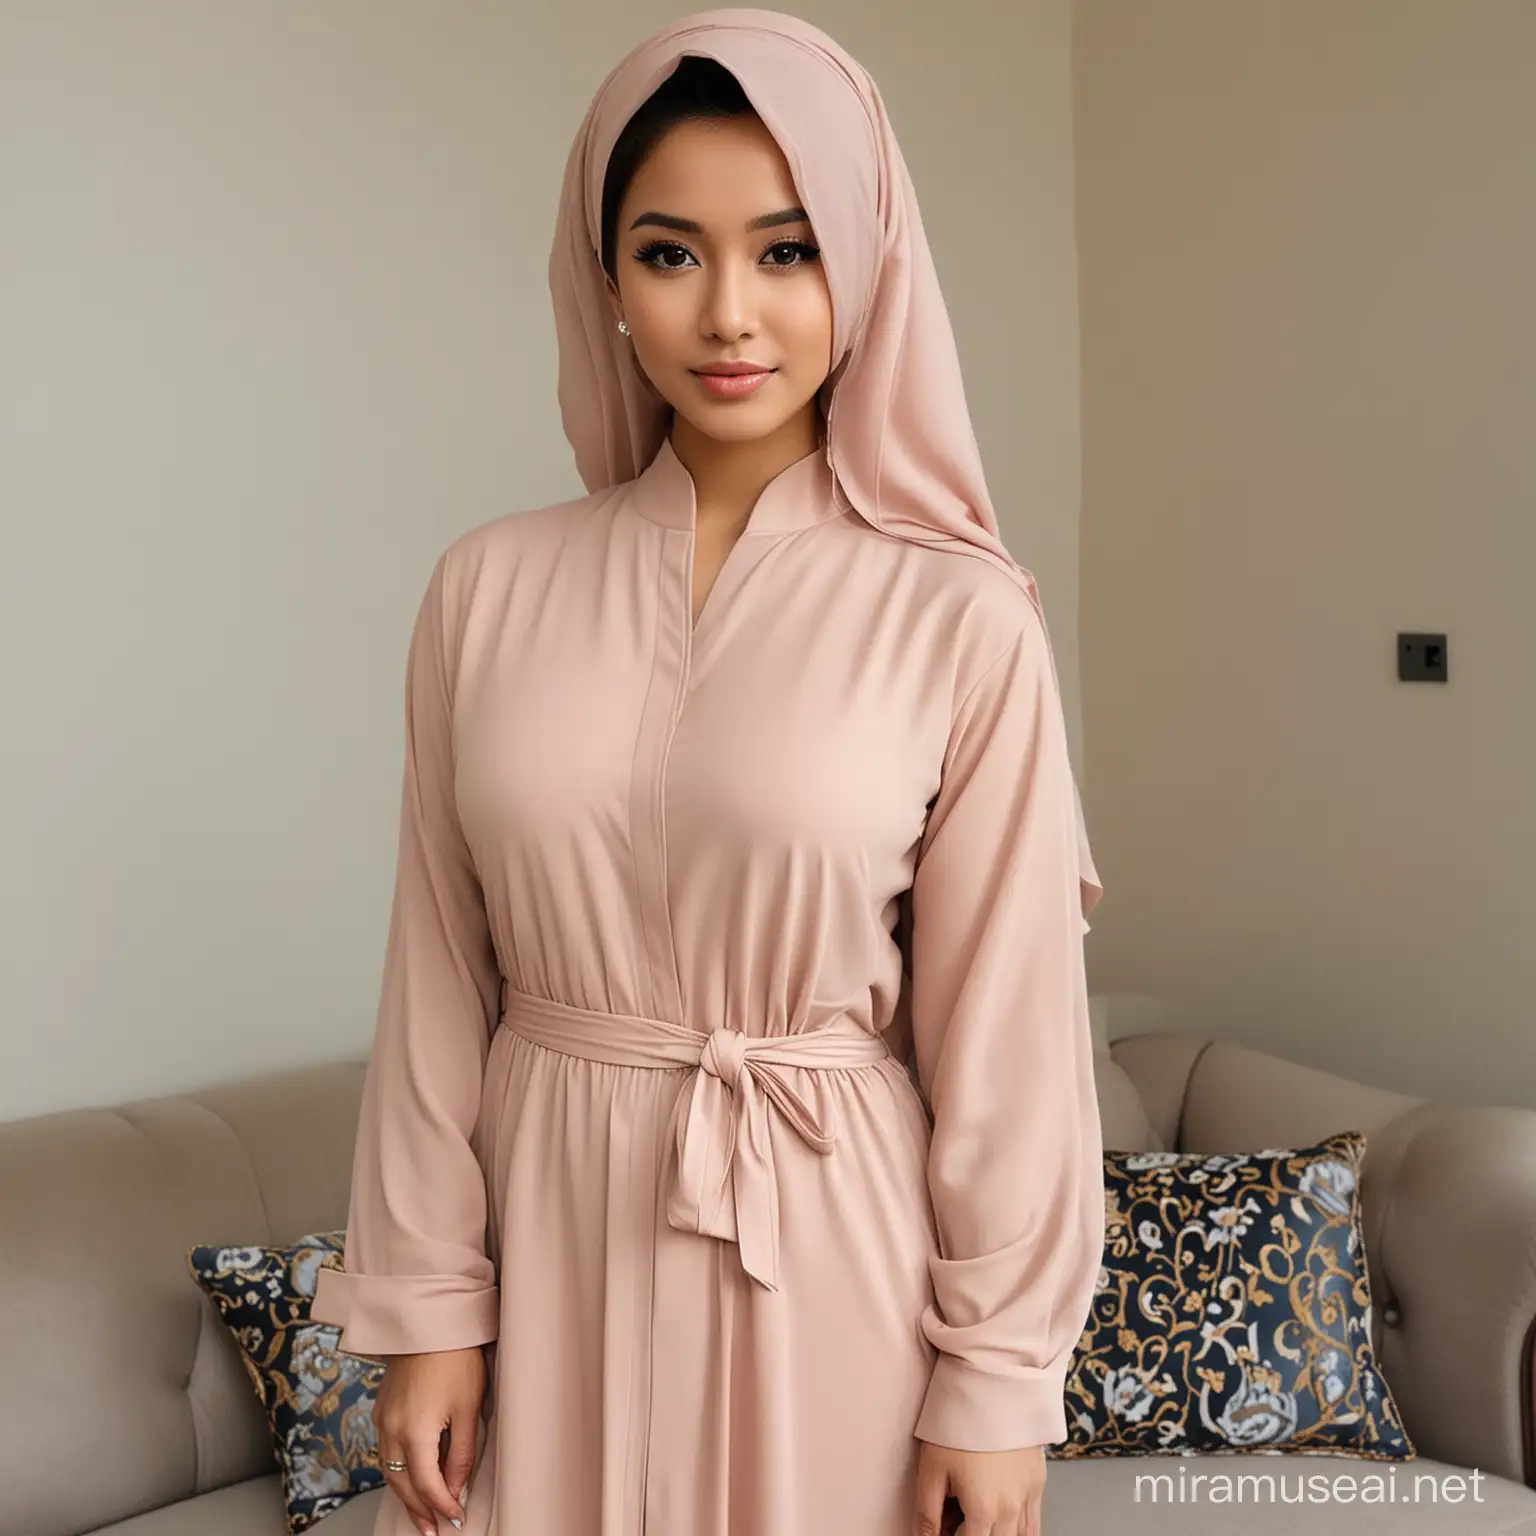 a malay girl super beautiful with nude colour abaya that show her nipple